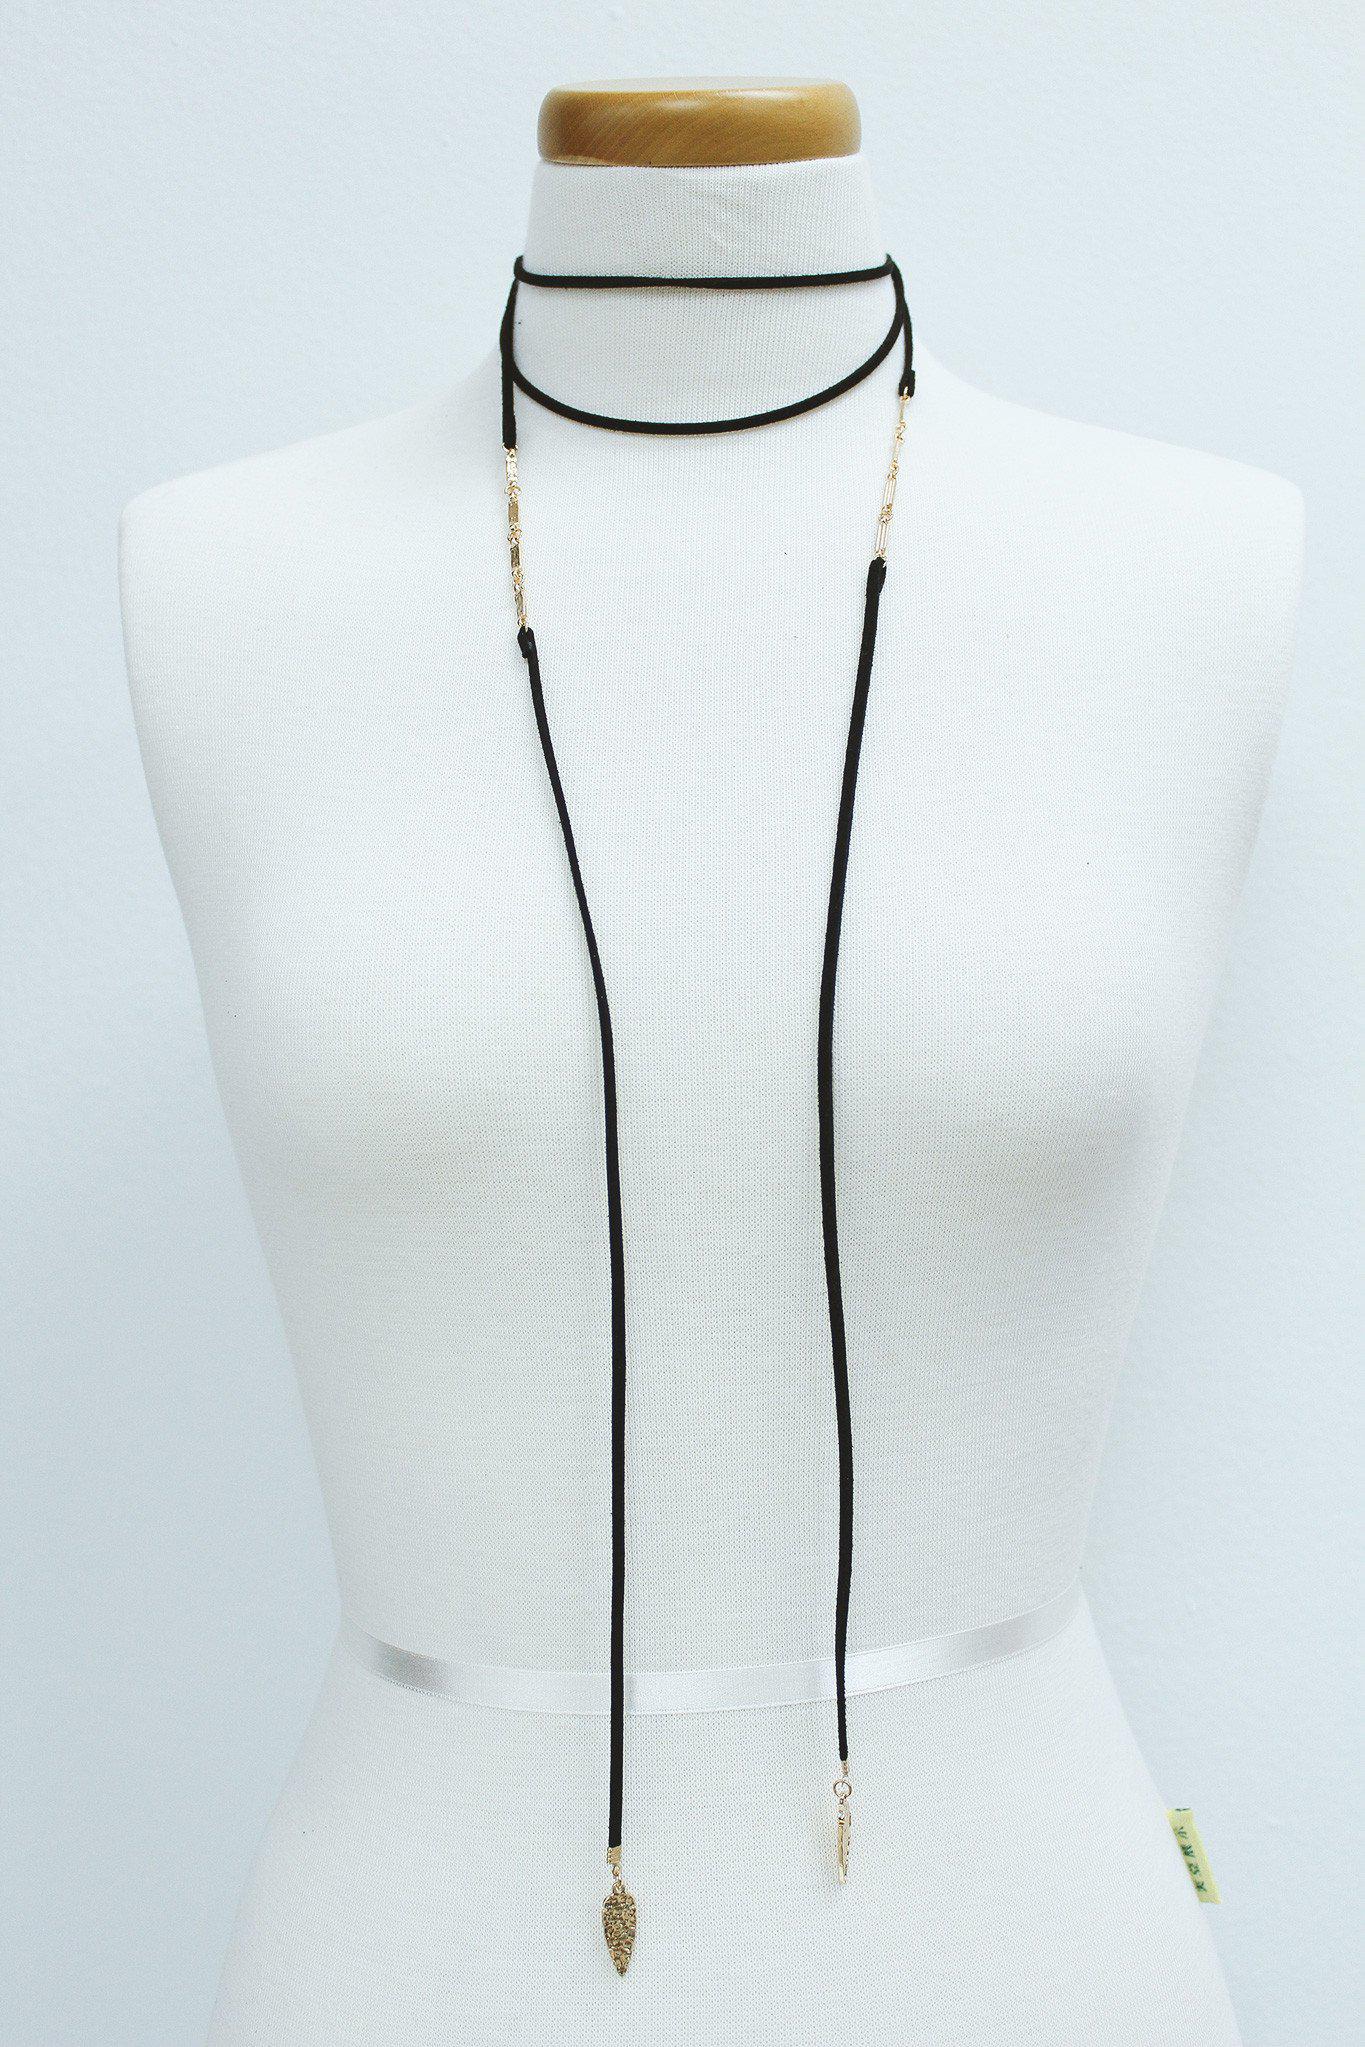 black wrap around choker with gold detail